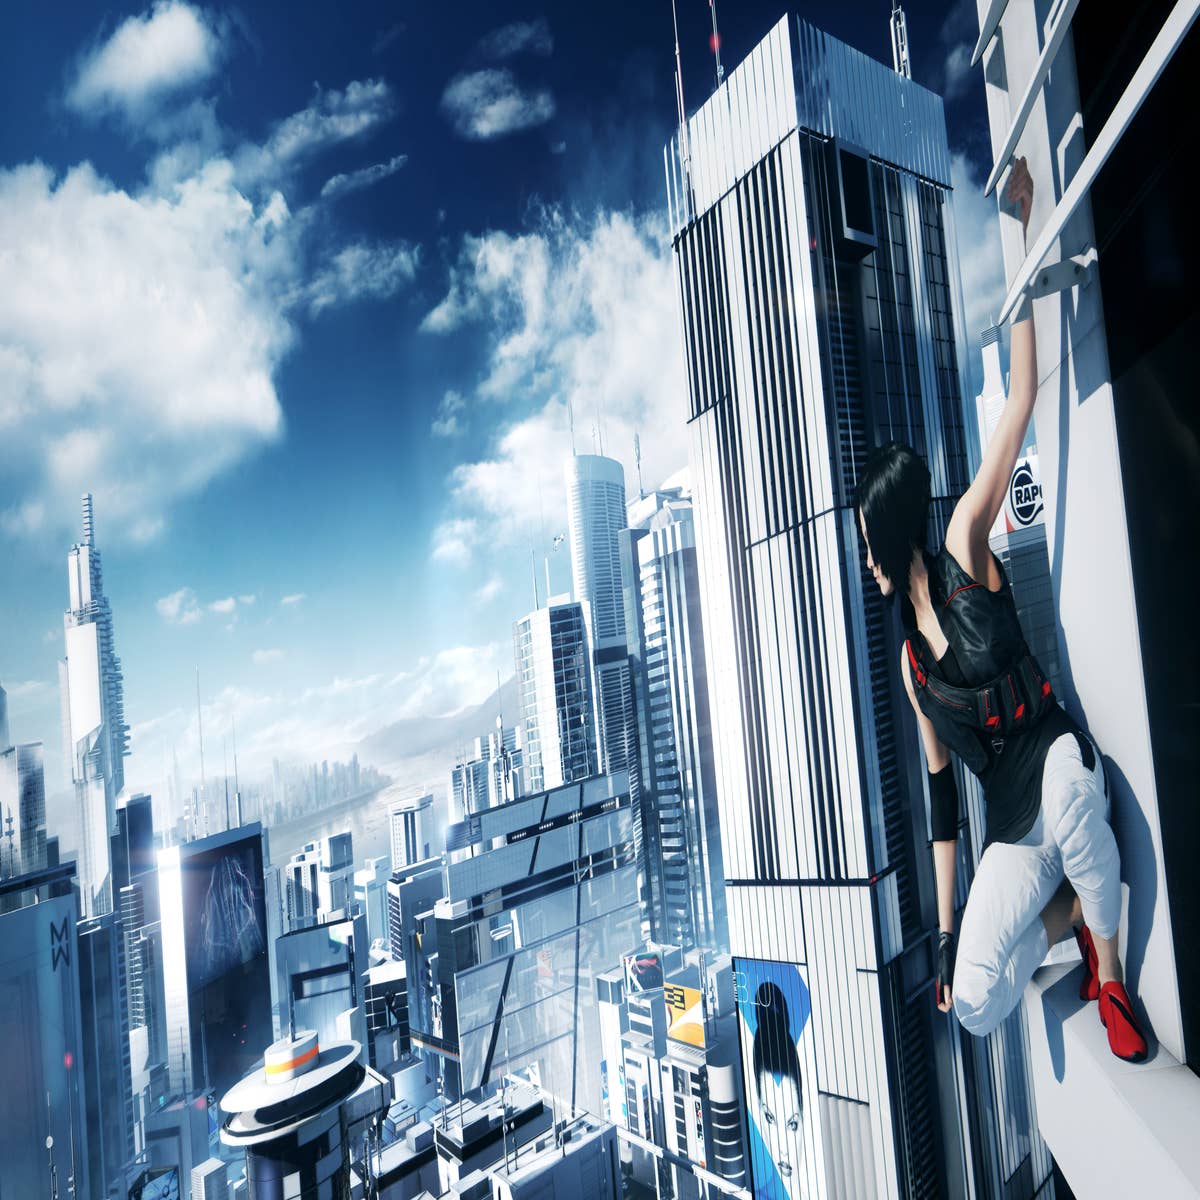 Images of Mirror's Edge 3 generated by an AI : r/mirrorsedge